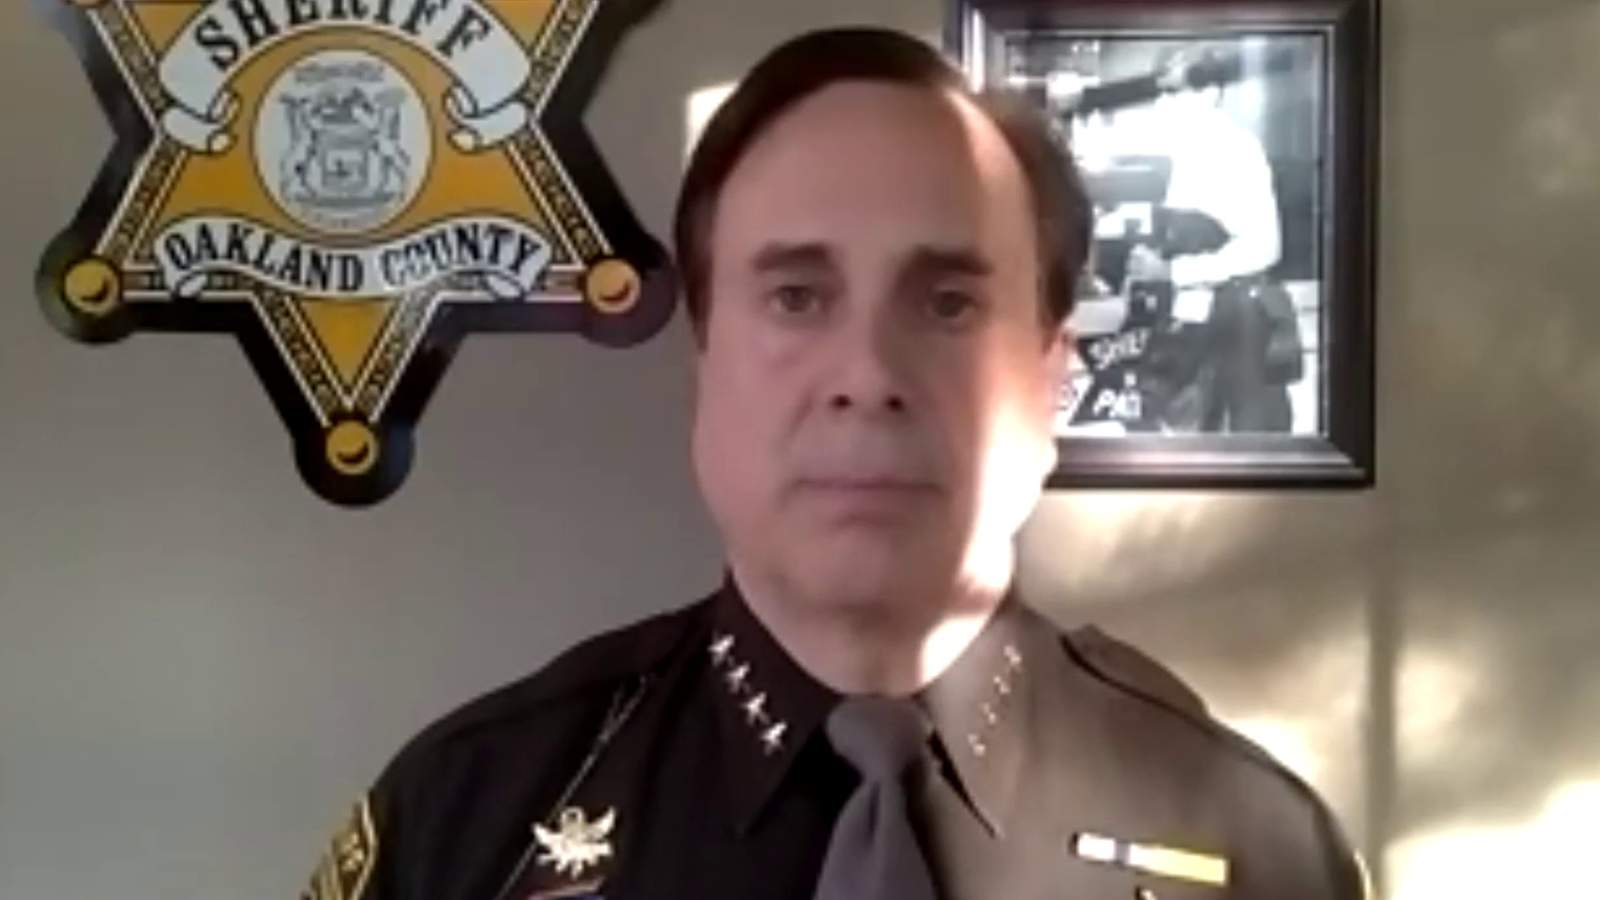 Oakland County Sheriff Mike Bouchard clarifies position on enforcement of Gov. Whitmer’s Executive Orders